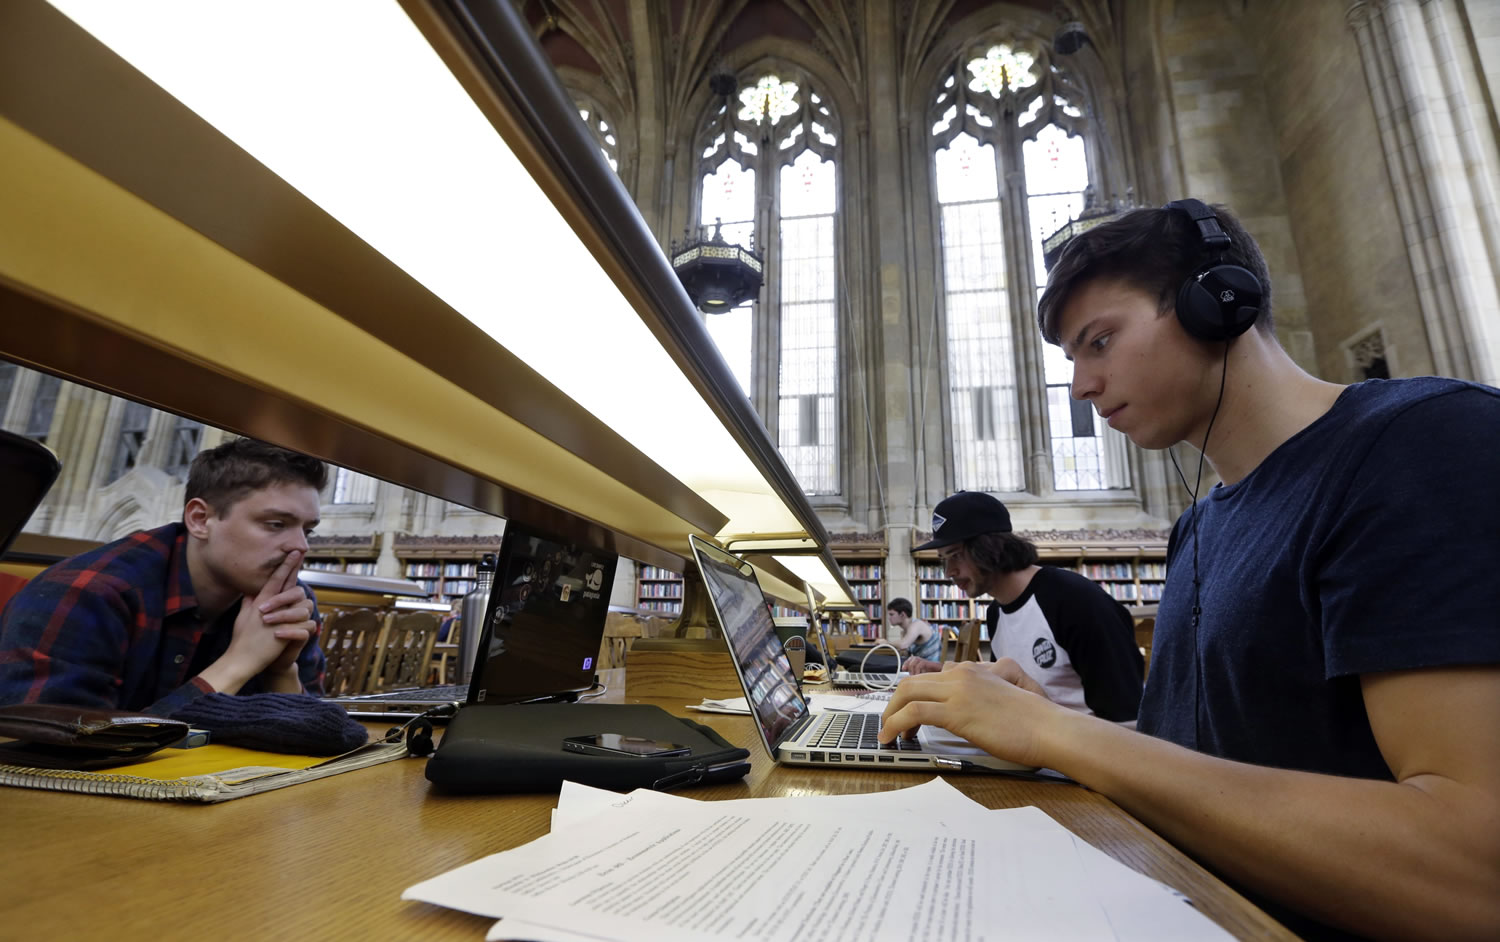 University of Washington students Benjamin Ferschli, left, Oscar Haavardsholm and Nicholas McMillan study April 26 in Suzzallo Library at the school in Seattle. Some of Washington's colleges and universities have been celebrating their decision not to raise tuition this fall, but they actually didn't have a choice.